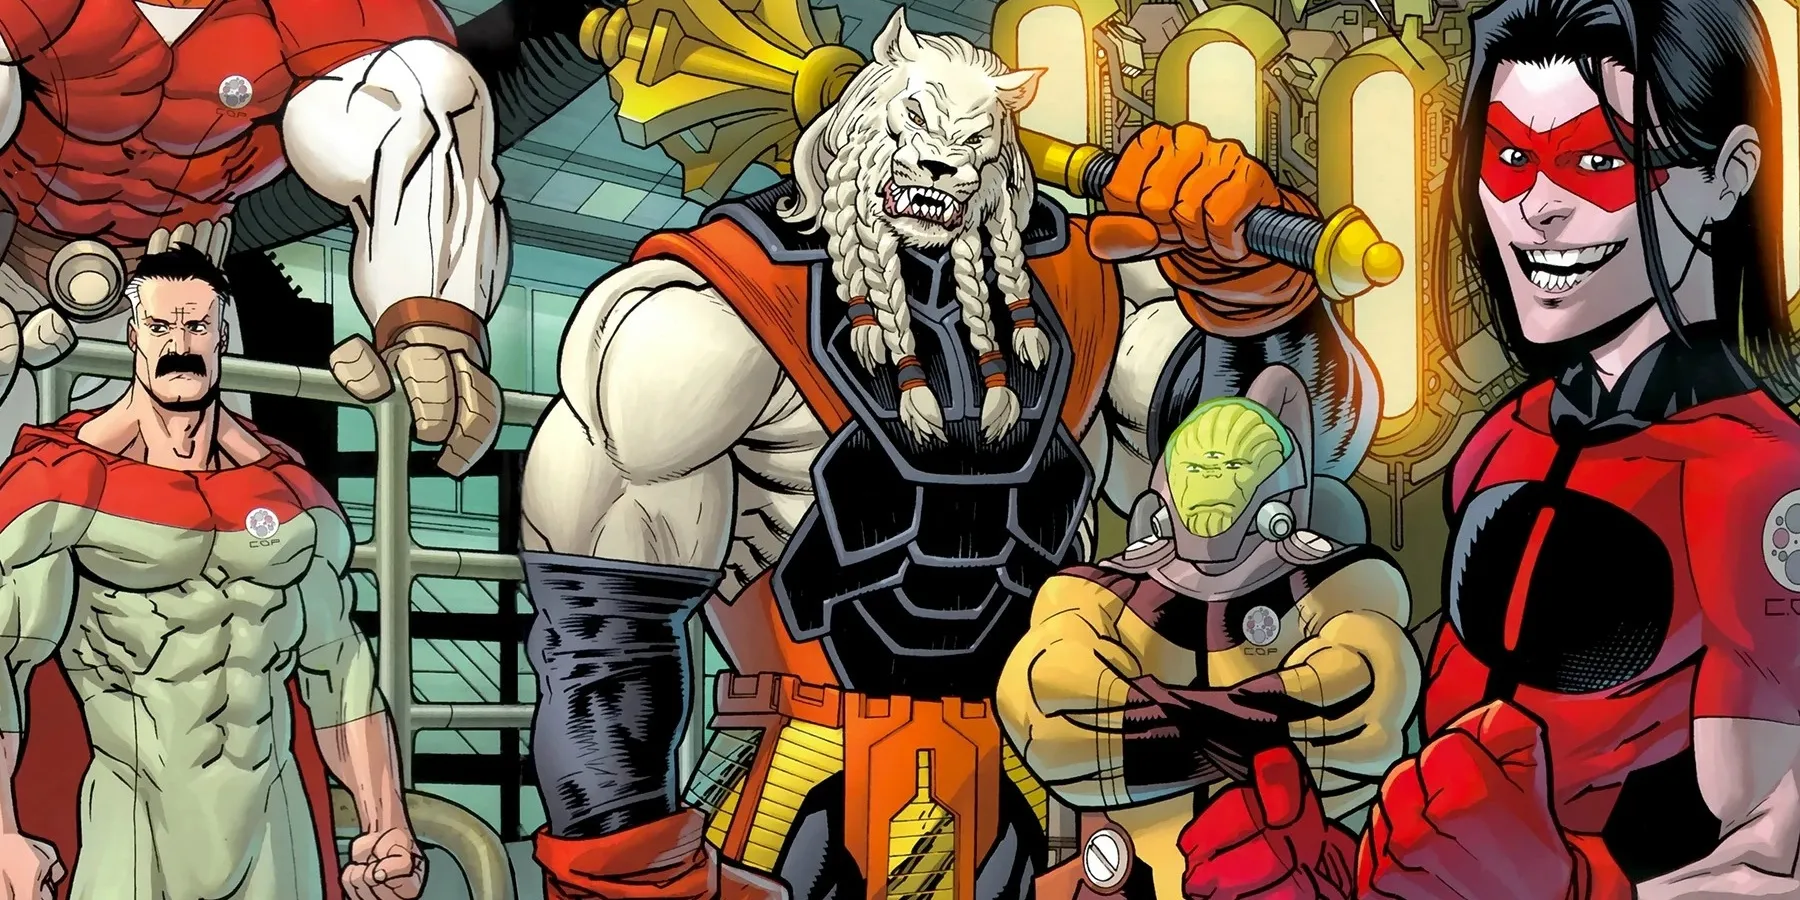 Battle Beast stands ready for a fight alongside other heroes